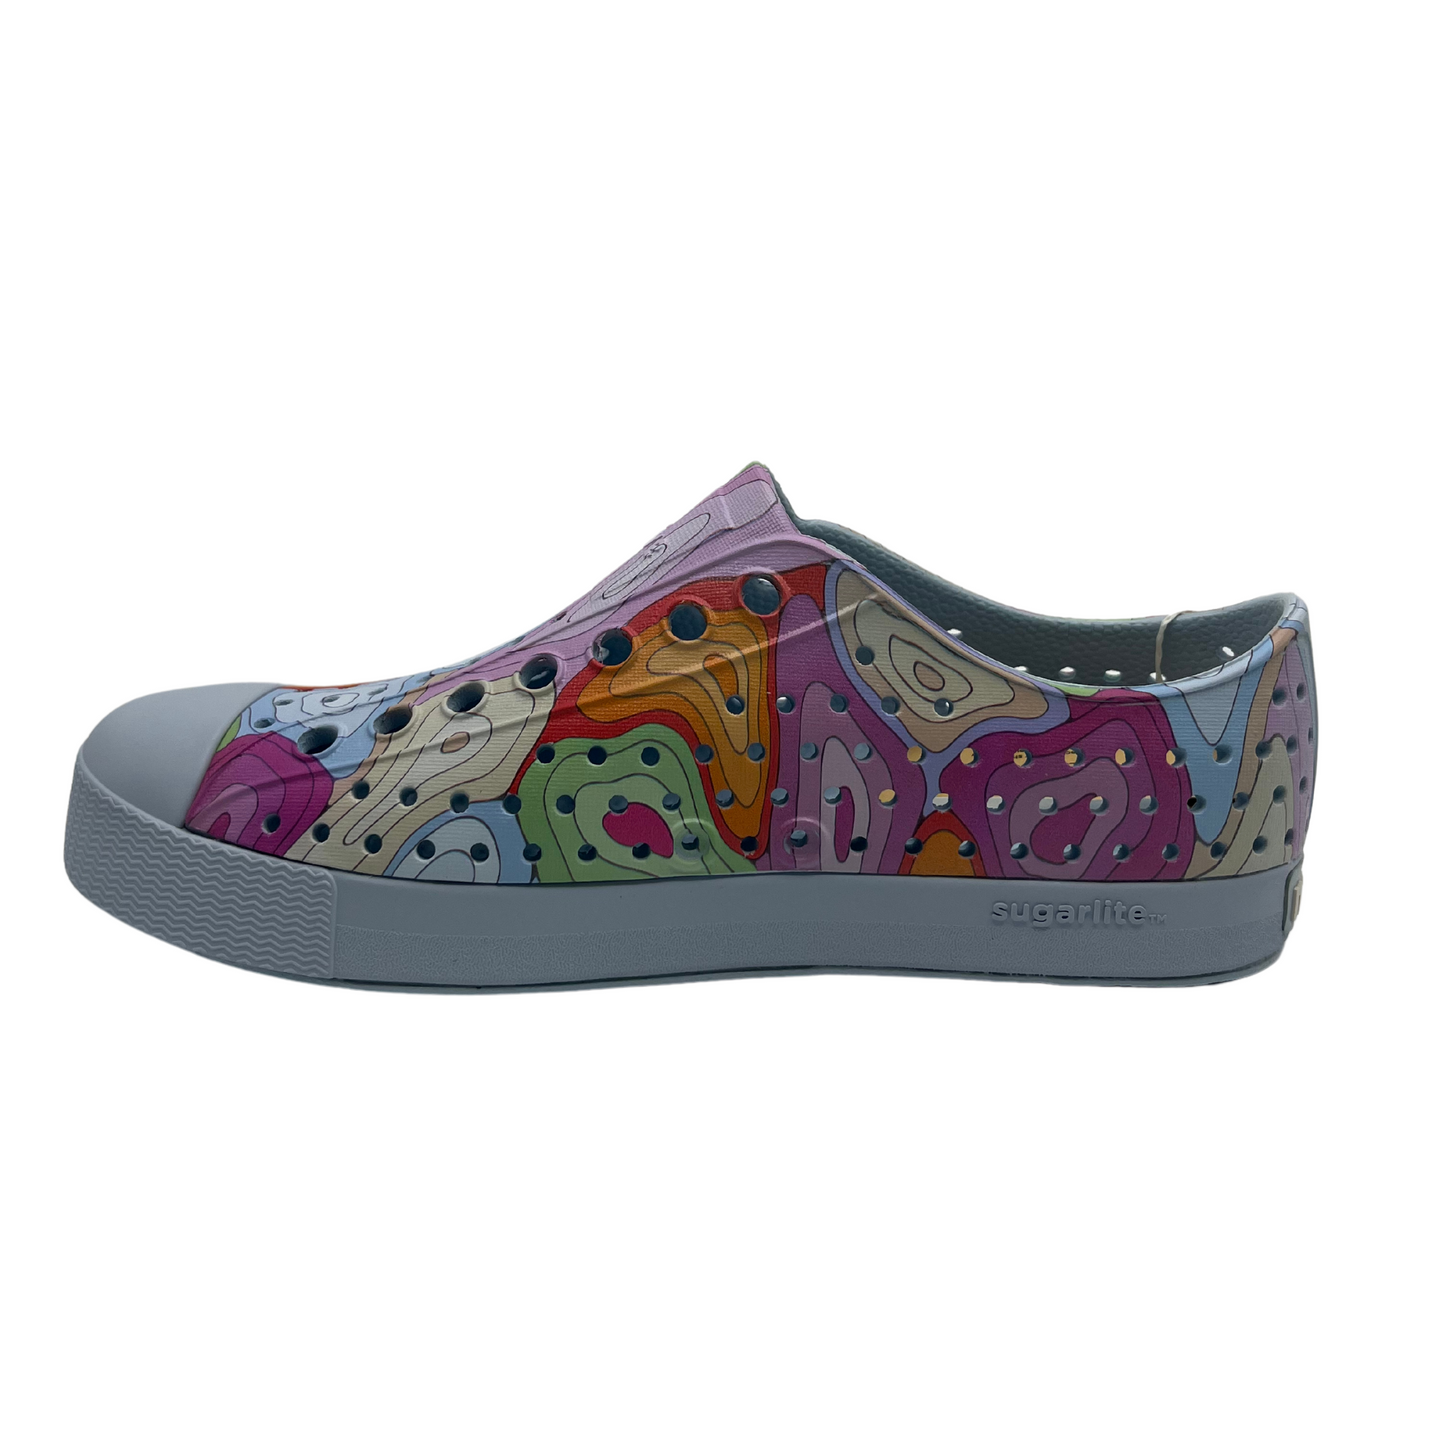 Left facing view of colourful EVA slip on shoes with rounded toe and perforated upper